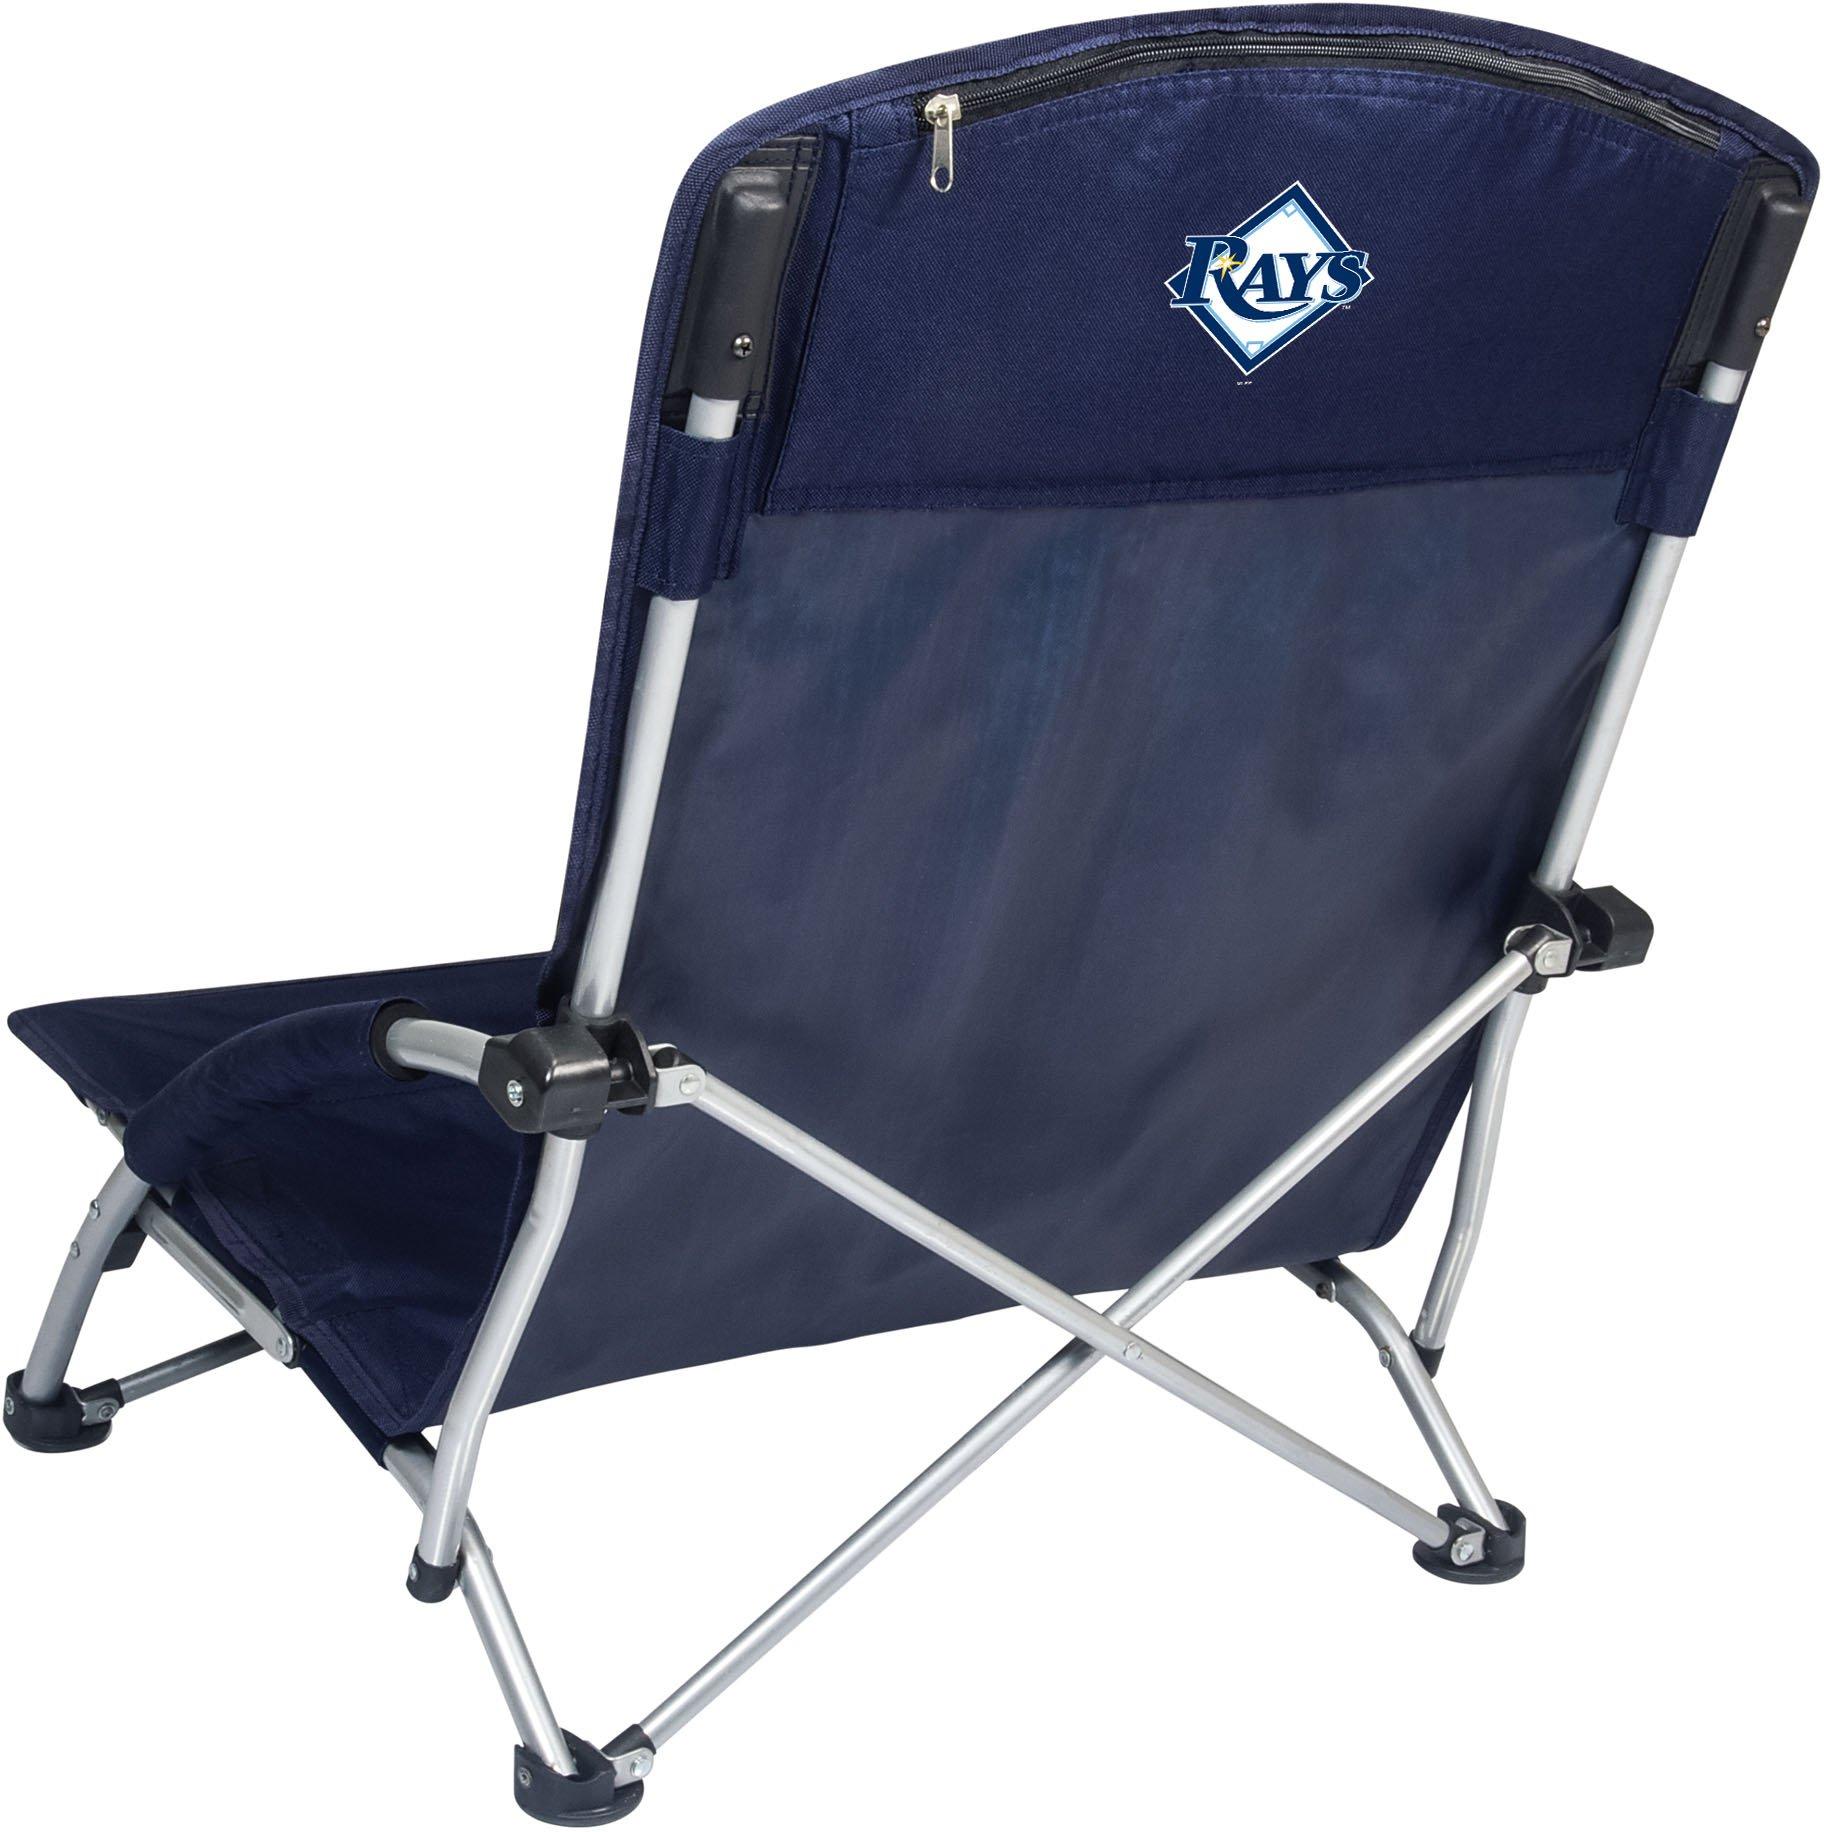 Tampa Bay Rays Tranquility Chair by Oniva